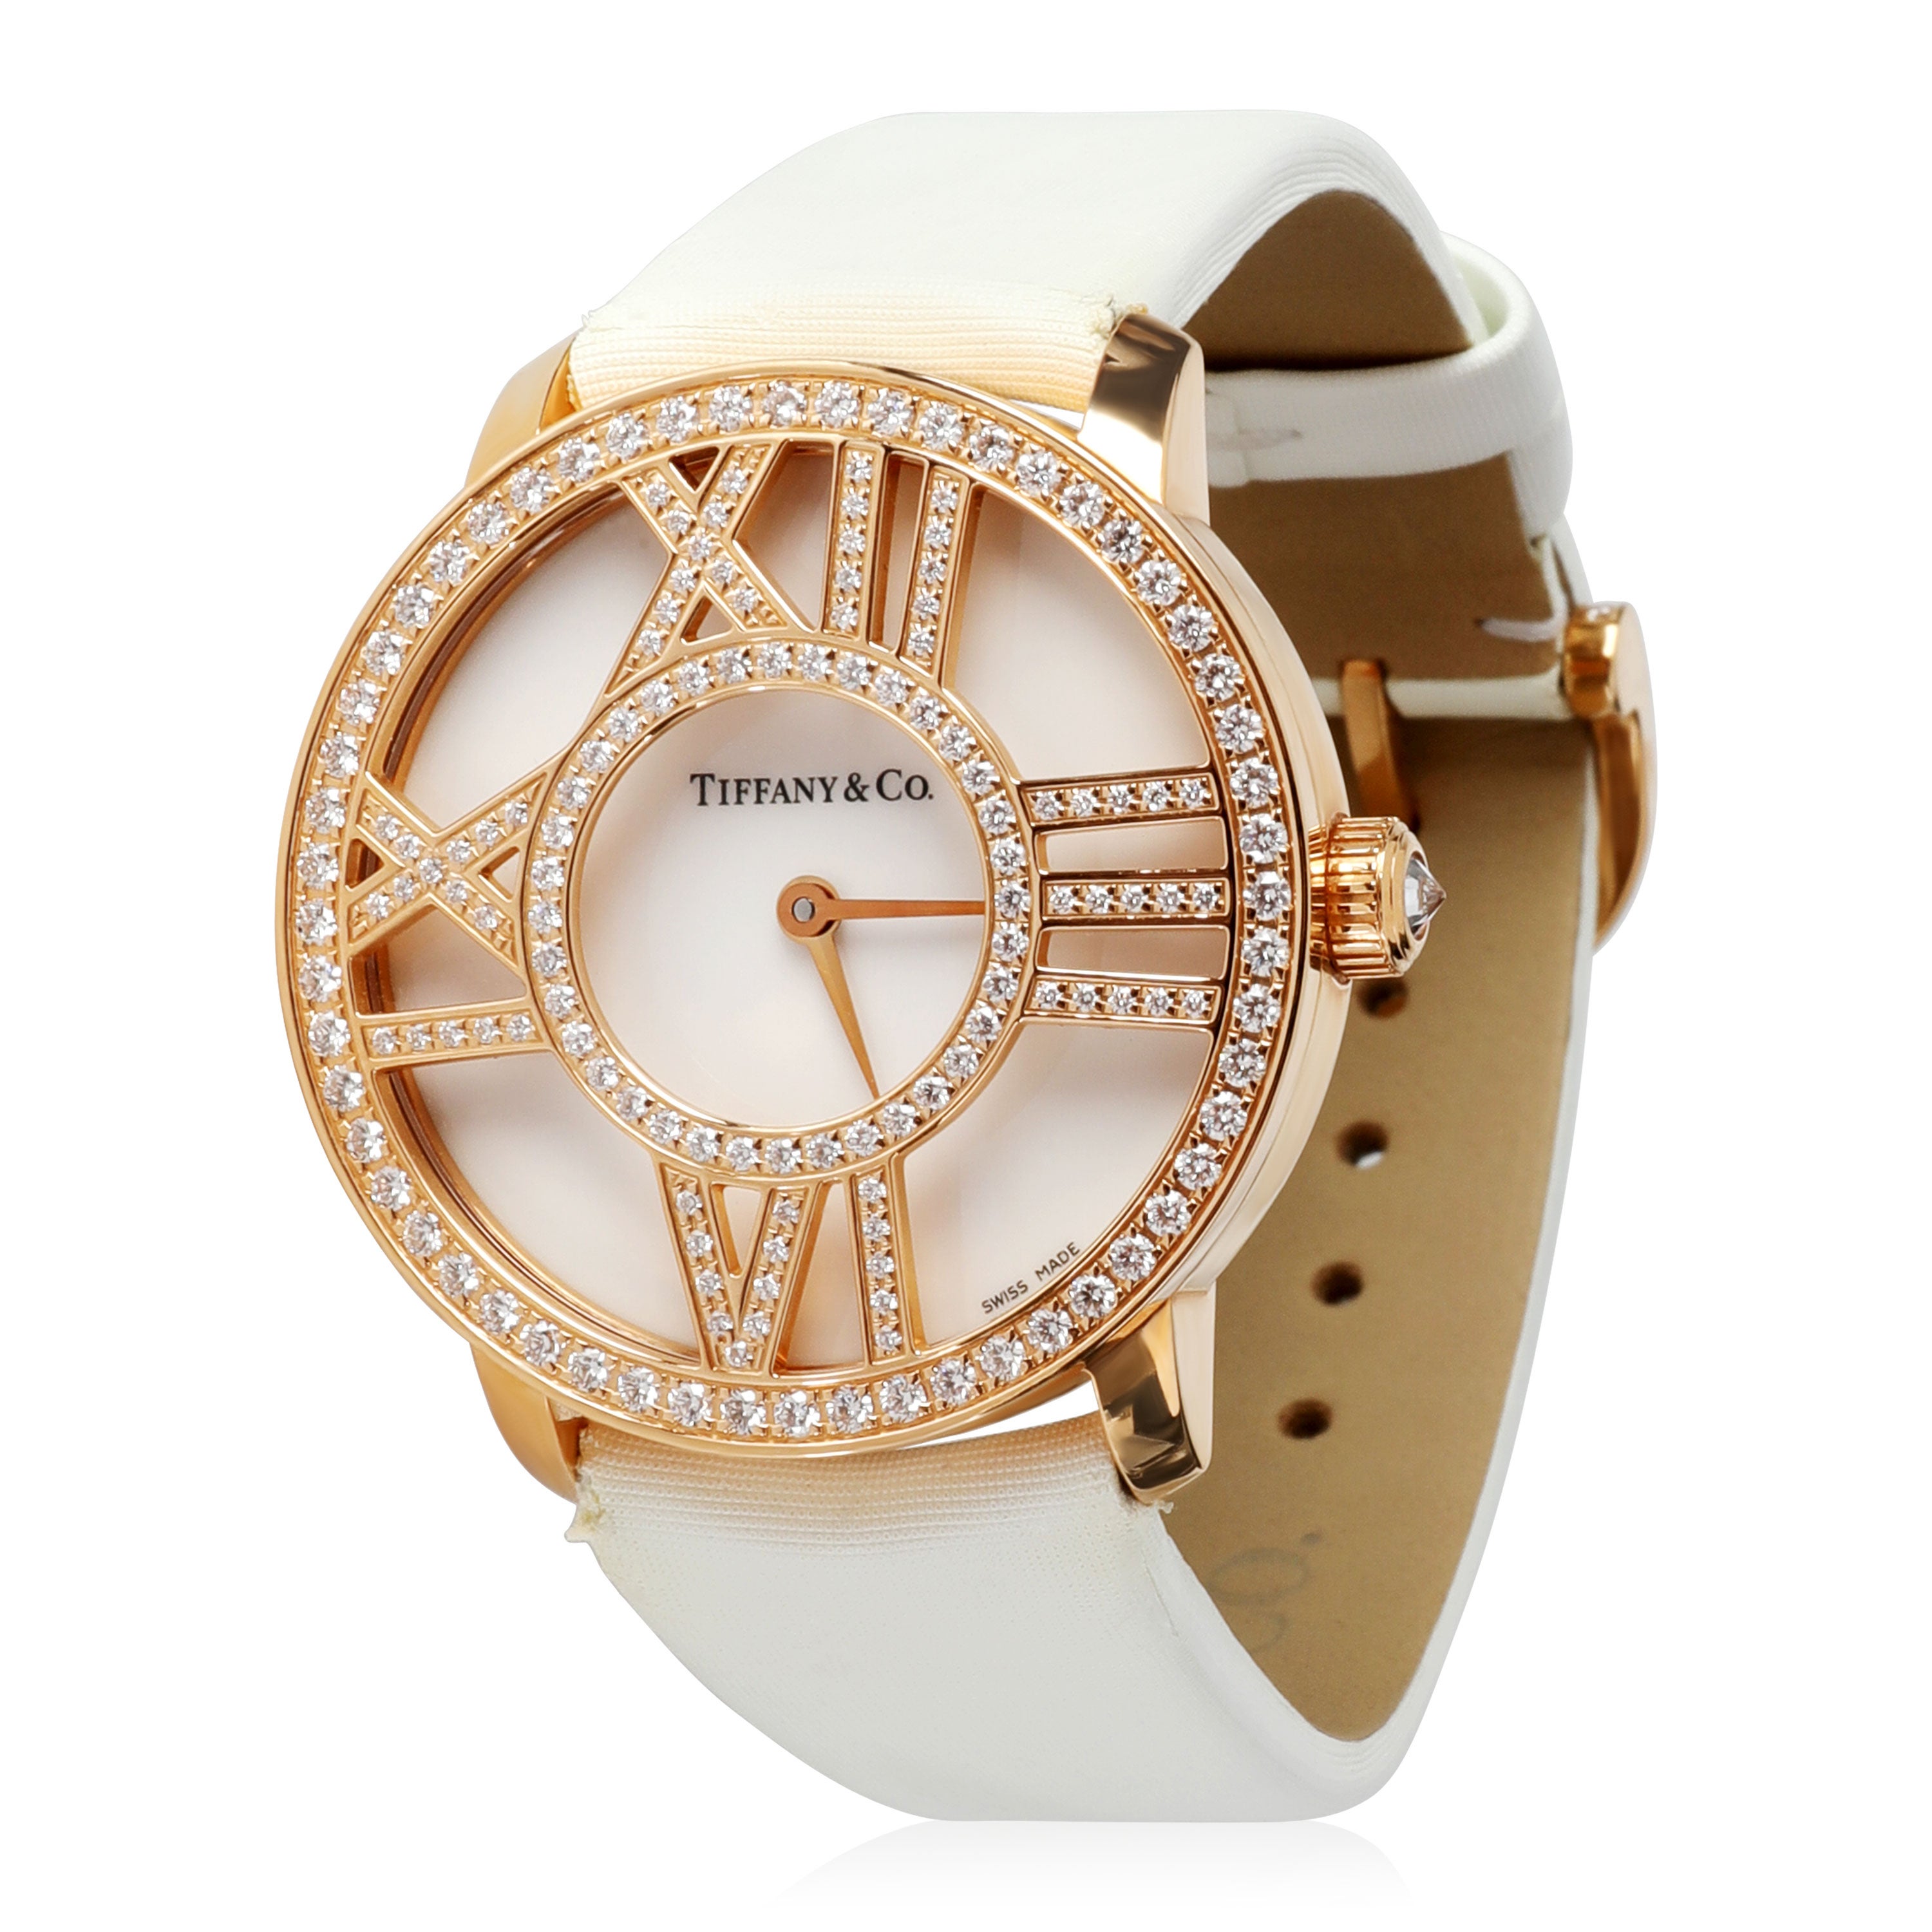 Tiffany 18k Gold Watches - 82 For Sale on 1stDibs | rose gold 